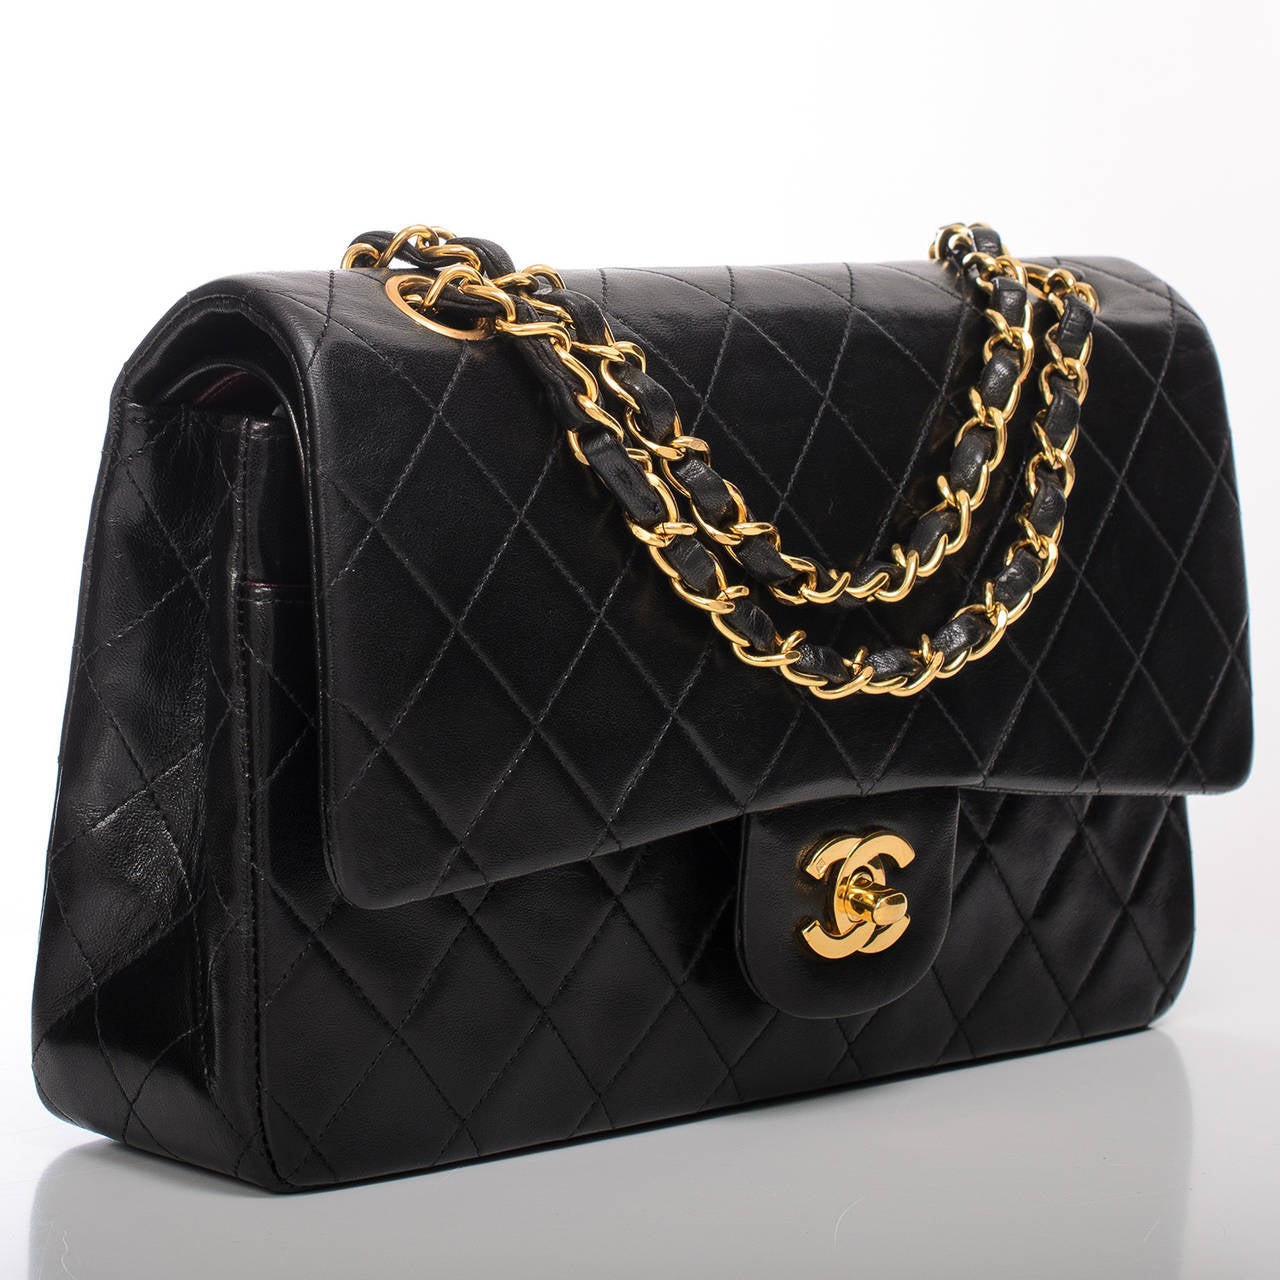 Chanel vintage black Large Classic double flap bag in lambskin leather with gold tone hardware.

This vintage Chanel Large Classic double flap bag proves the timelessness of the Chanel Classic. This bag features all the signature details of a